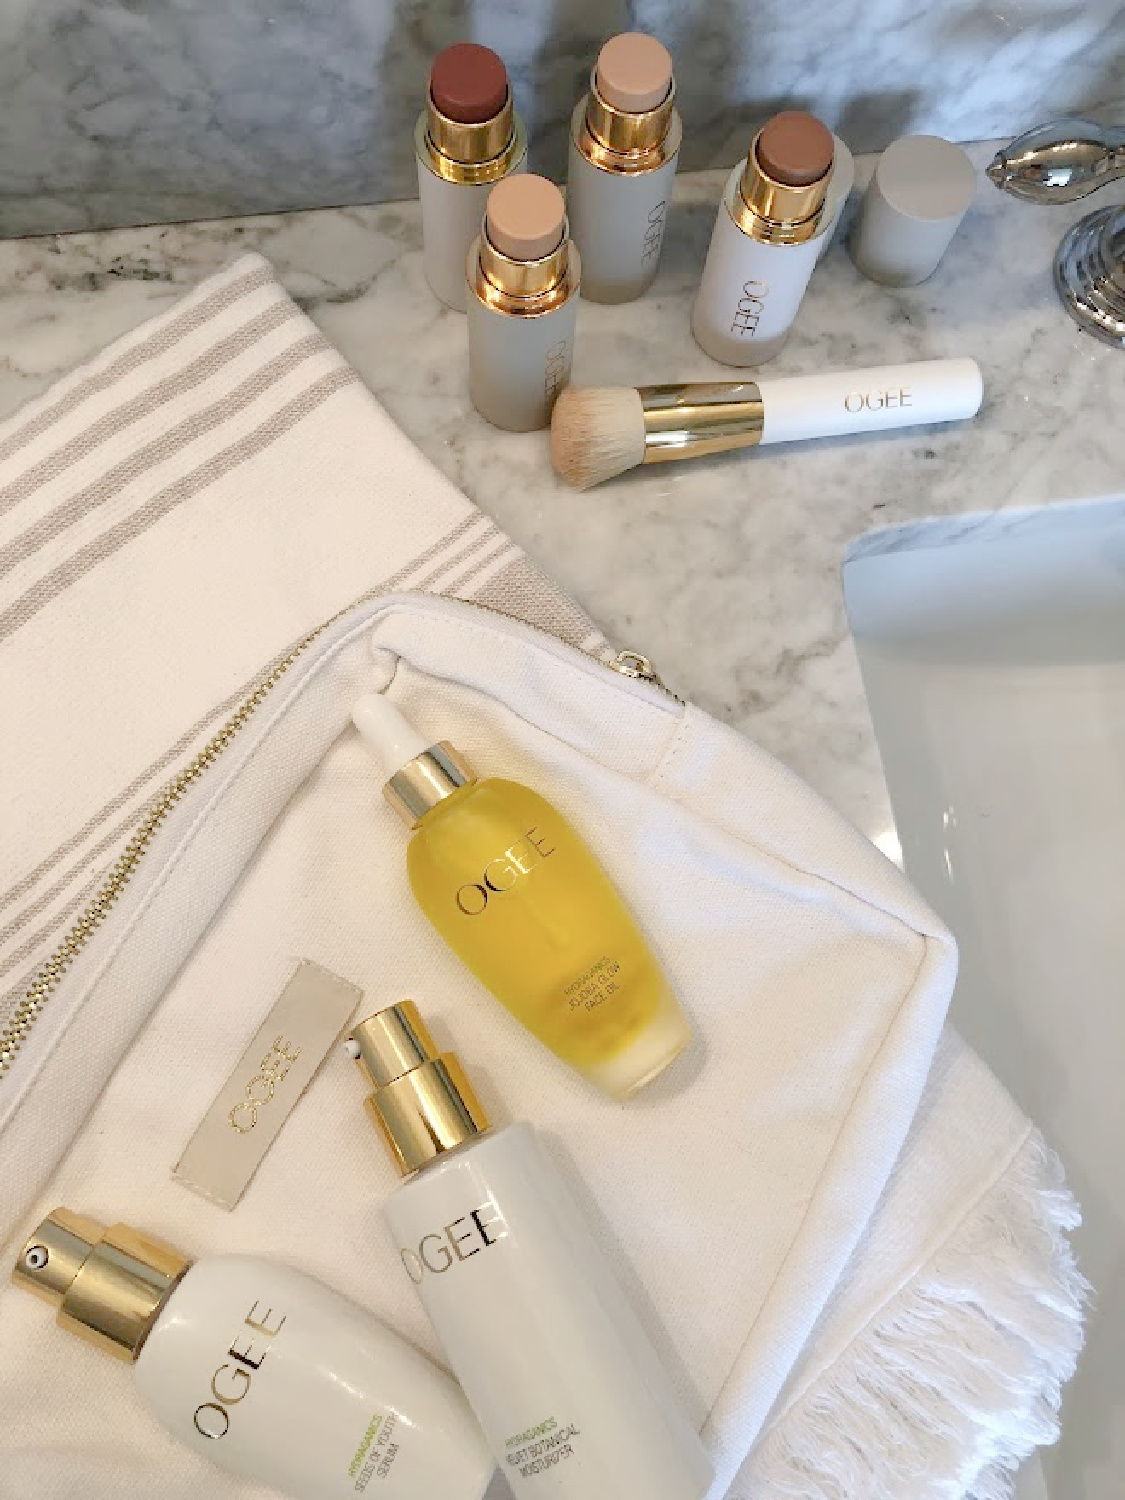 OGEE's organic skincare potions (Glow Trio), complexion sticks, face sticks, and blender brush on my vanity - Hello Lovely Studio. #organicmakeup #cleanmakeup #ogee